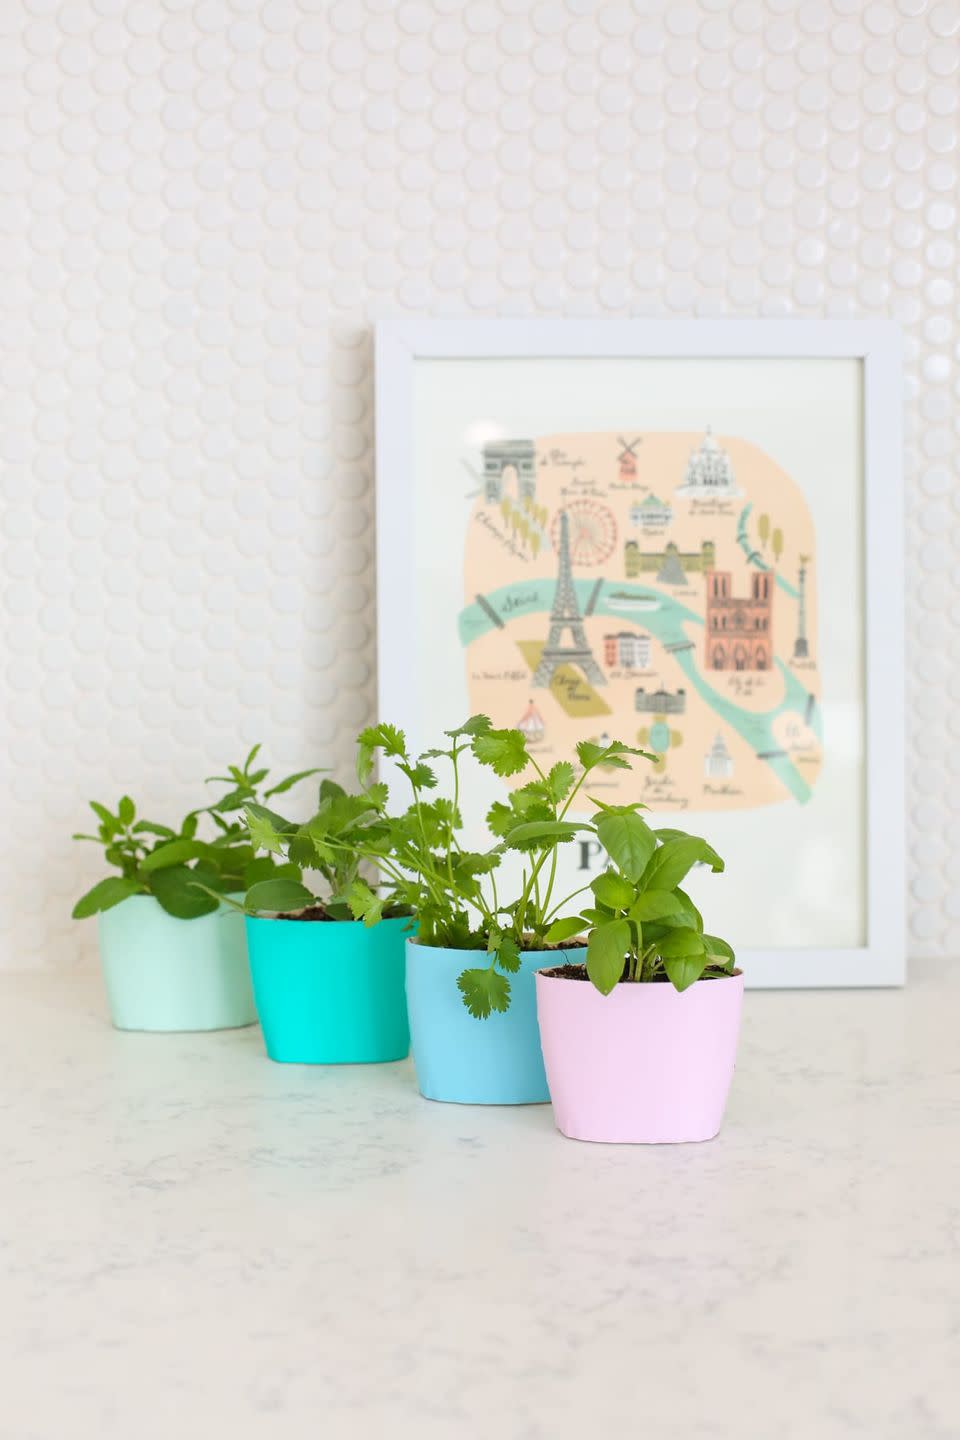 herb garden ideas colorful upcycled herb garden